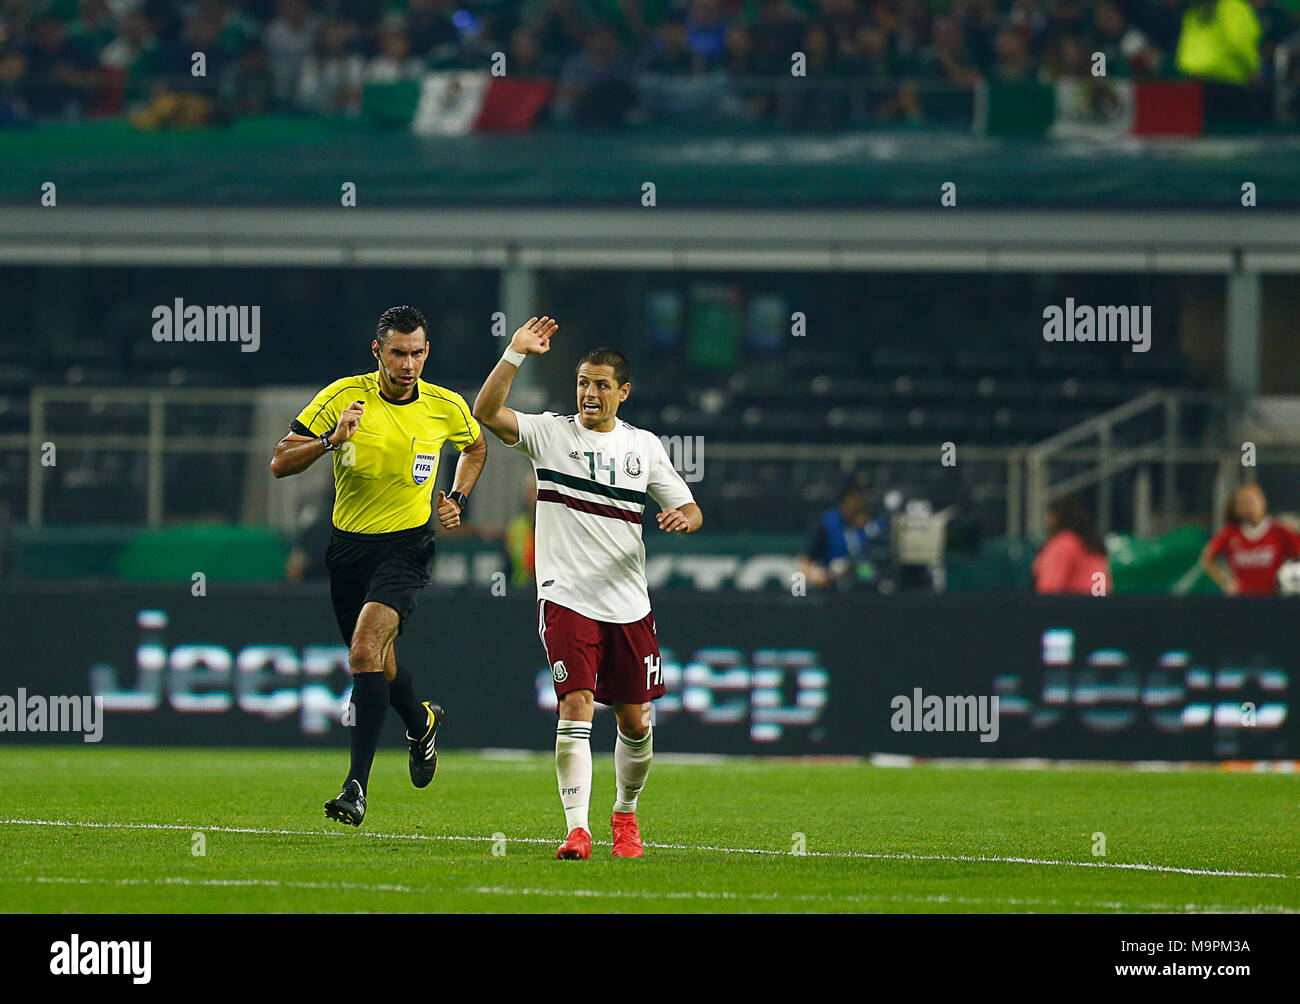 Arlington, Texas, USA. 27th Mar, 2018. March 27, 2018, Arlington Tx., USA. Javier Hernandez (14) of Mexico directs players during the second half of the Mexico vs Croatia International Friendly match at ATT Stadium in Arlington, Texas. Croatia defeated Mexico 1 to 0. Credit: Ralph Lauer/ZUMA Wire/Alamy Live News Stock Photo